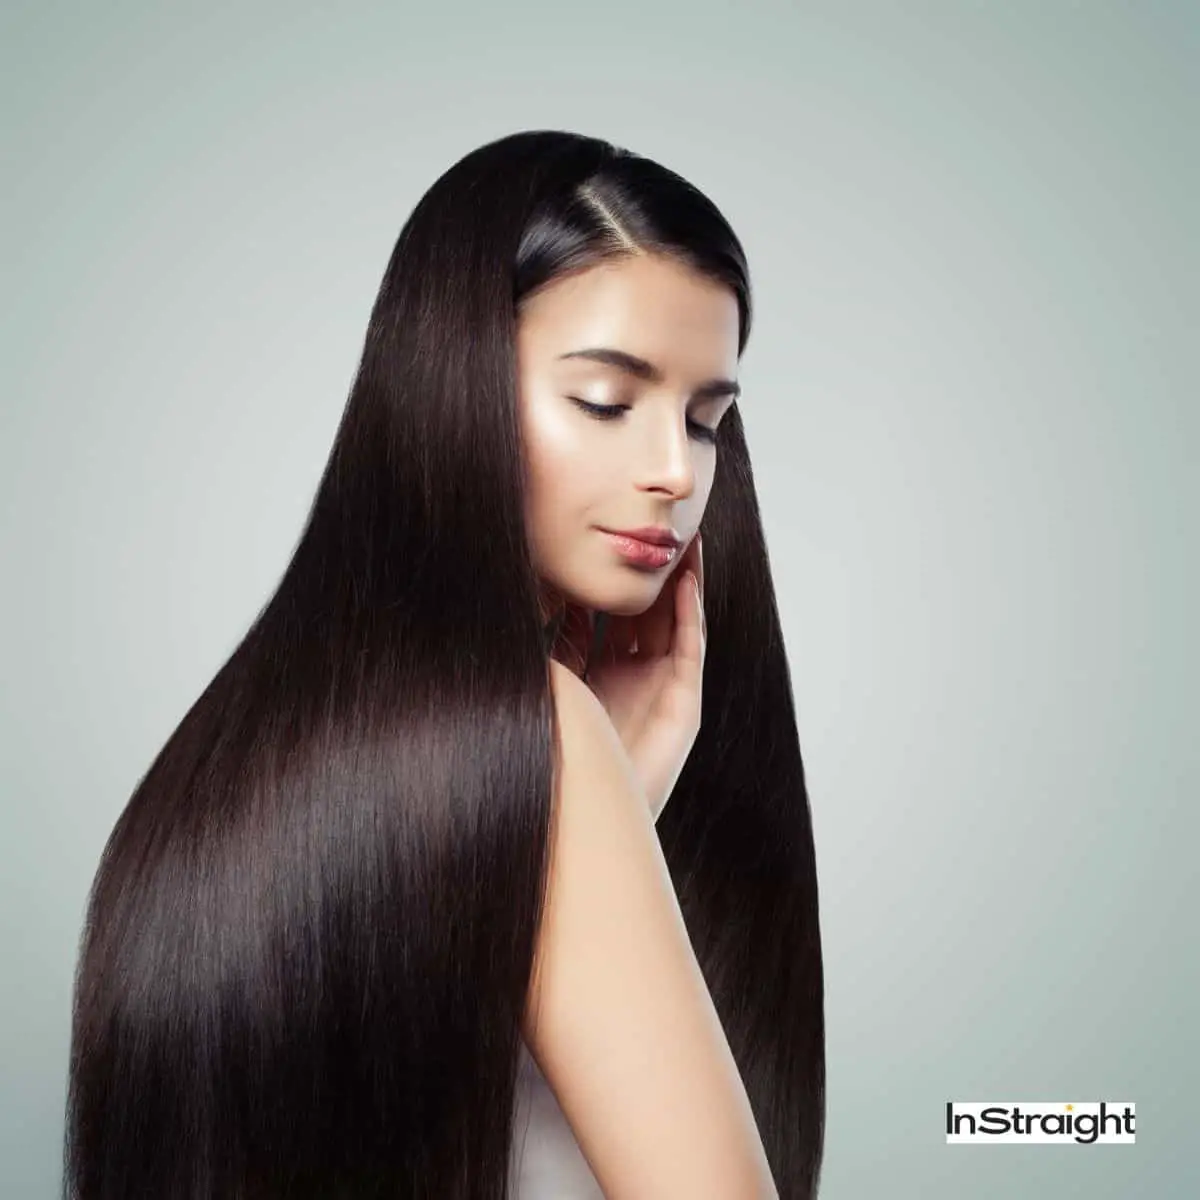 TIPS TO GET STRAIGHT HAIR